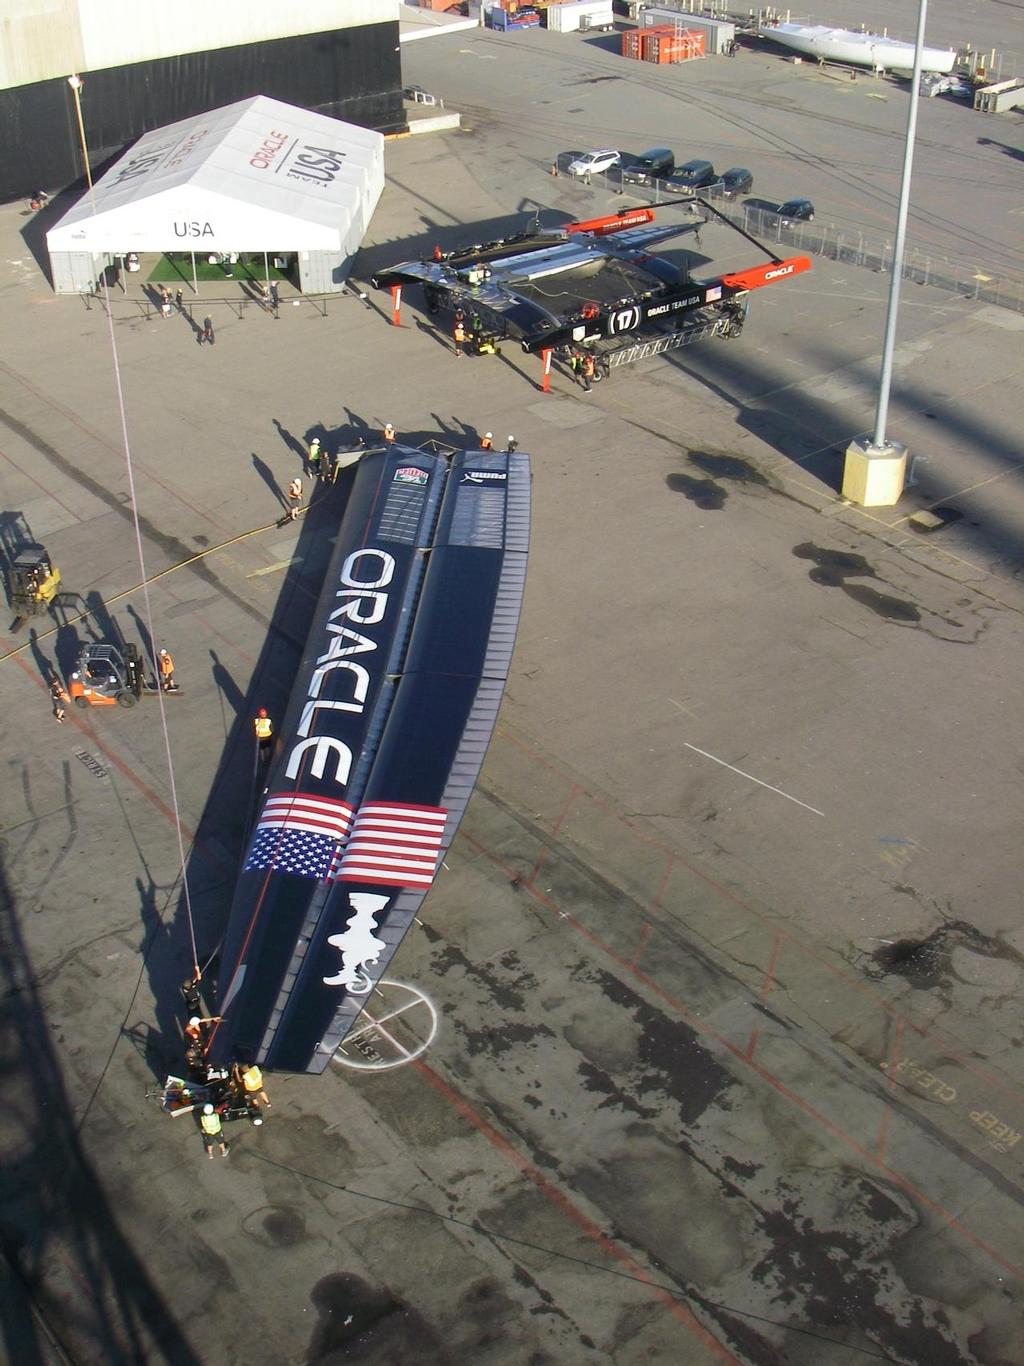 Oracle Team USA wingsail in the ground showing proportions. Wingsails will be one design in the new AC62 class rule. © Neil Wilkinson - OTUSA